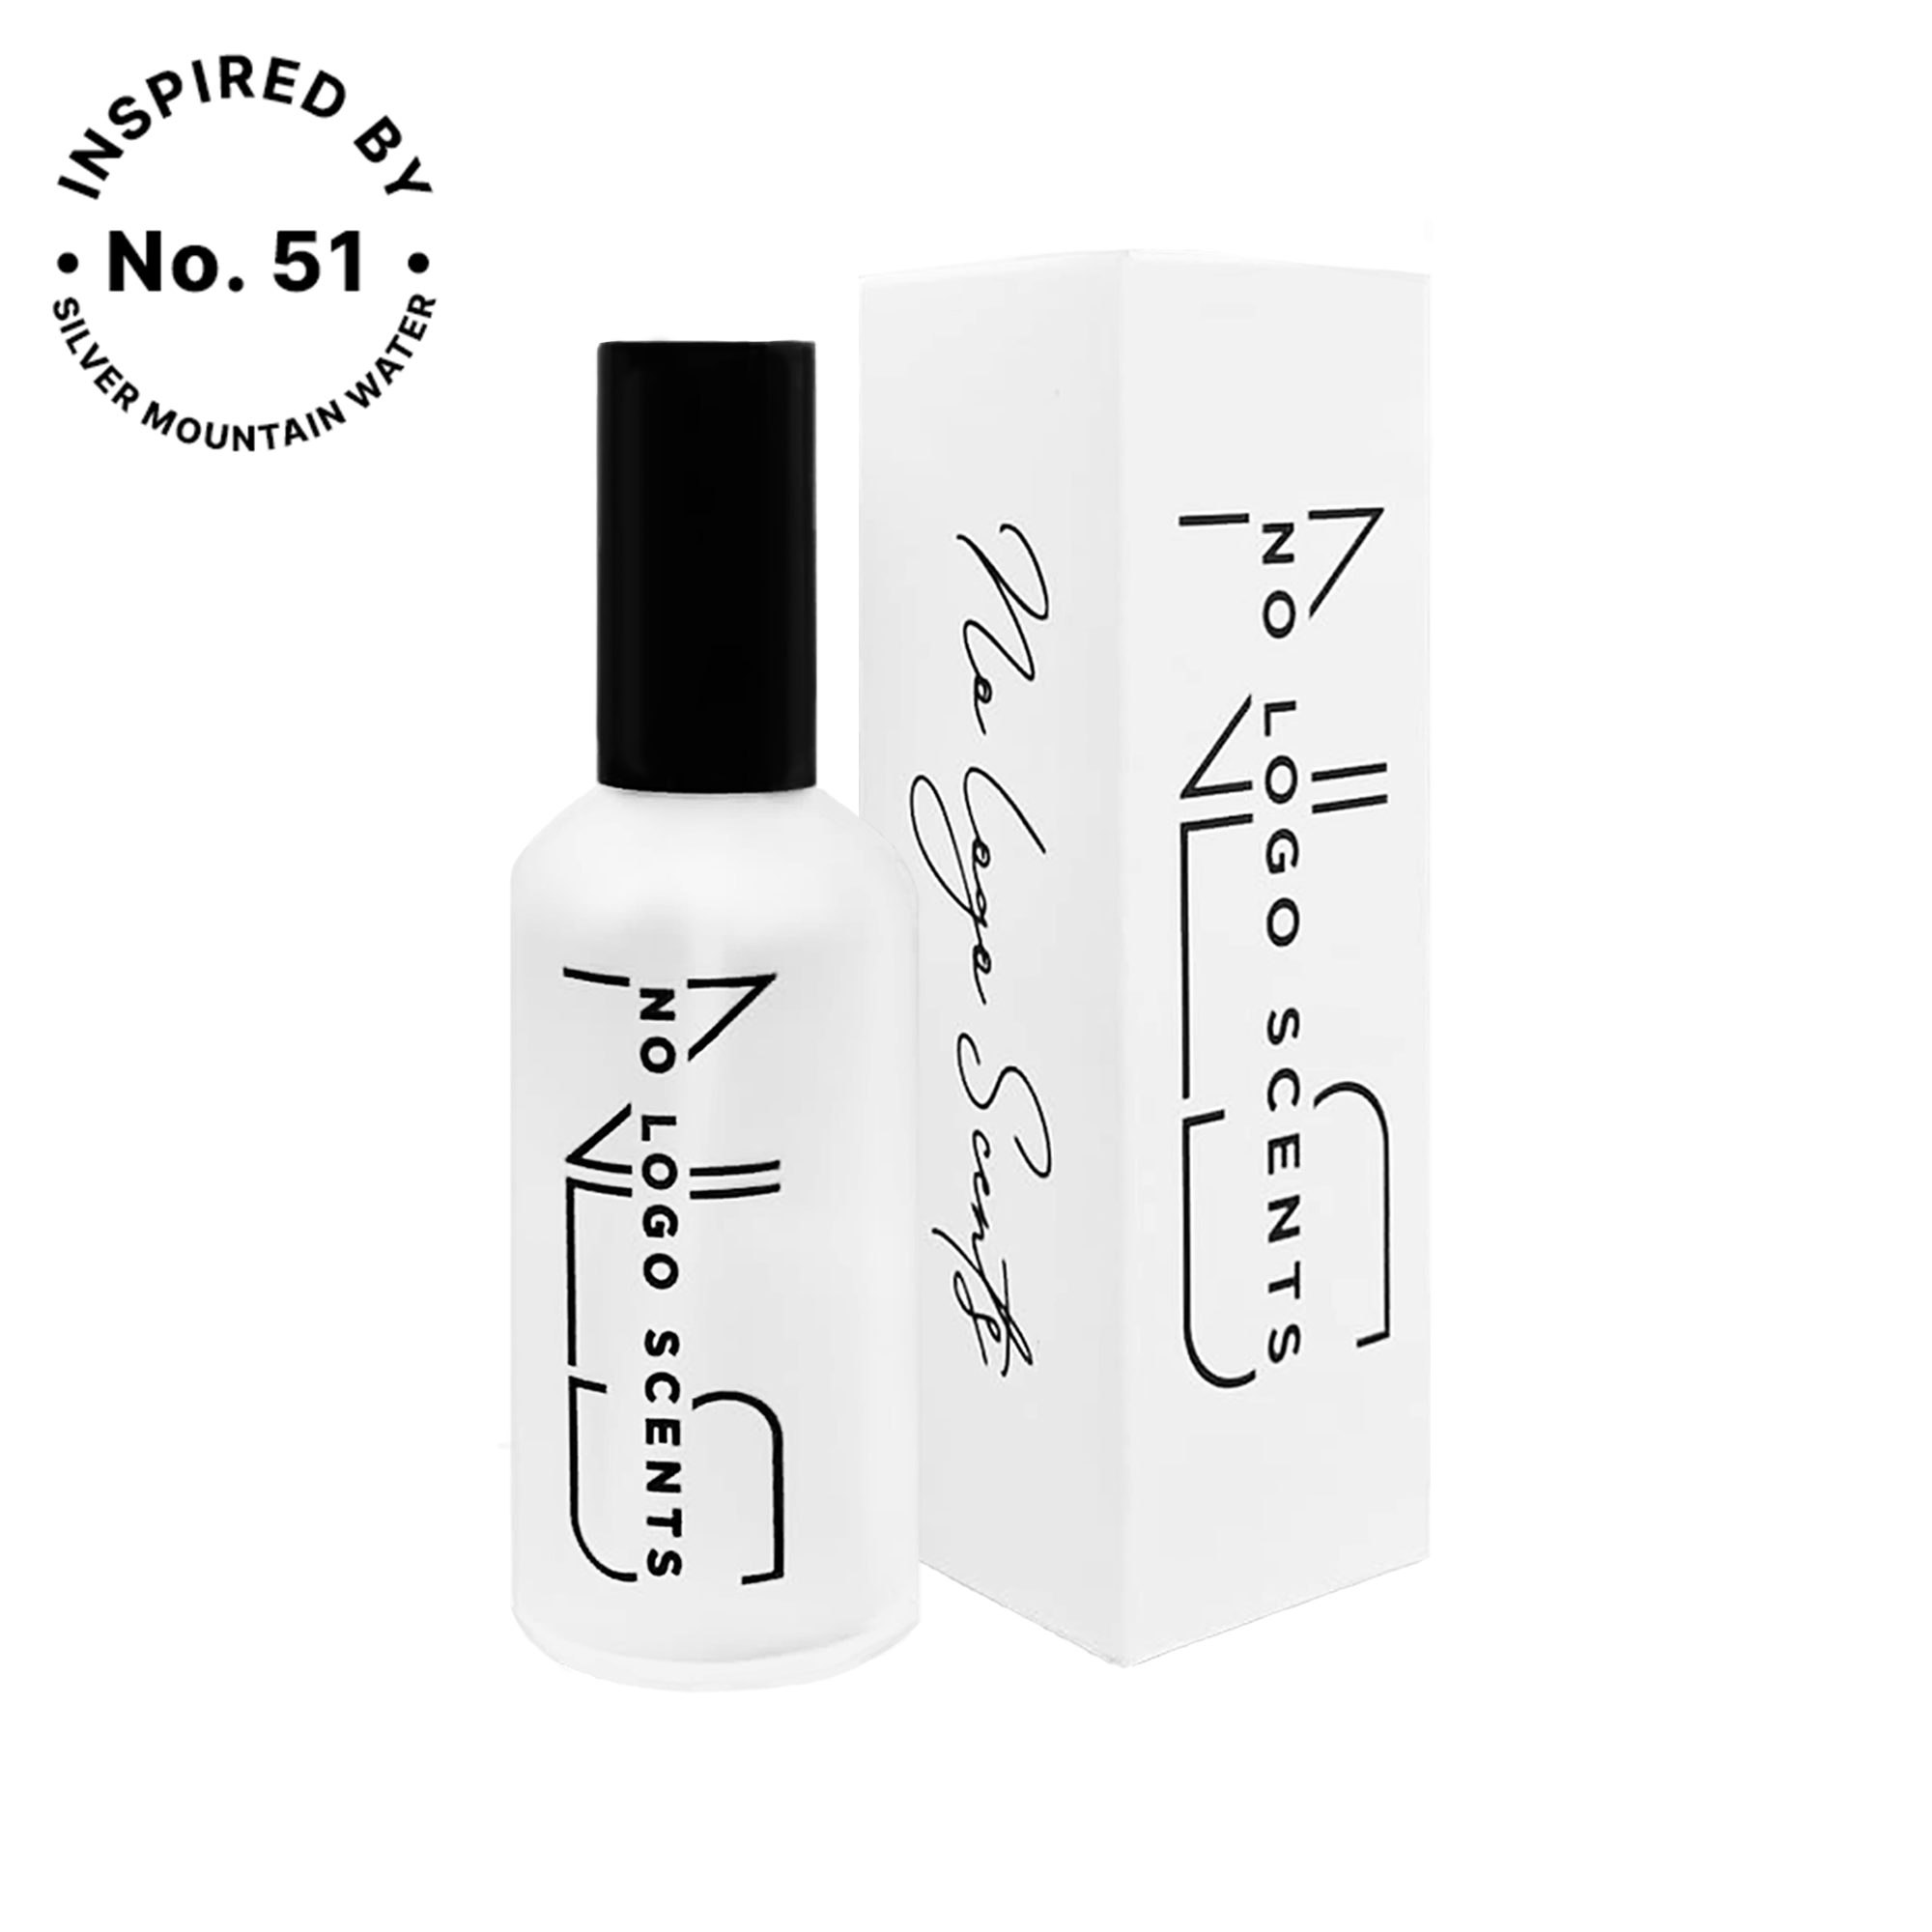 No.51 INSPIRED BY SILVER MOUNTAIN WATER from category MEN’S AFTERSHAVES - 1